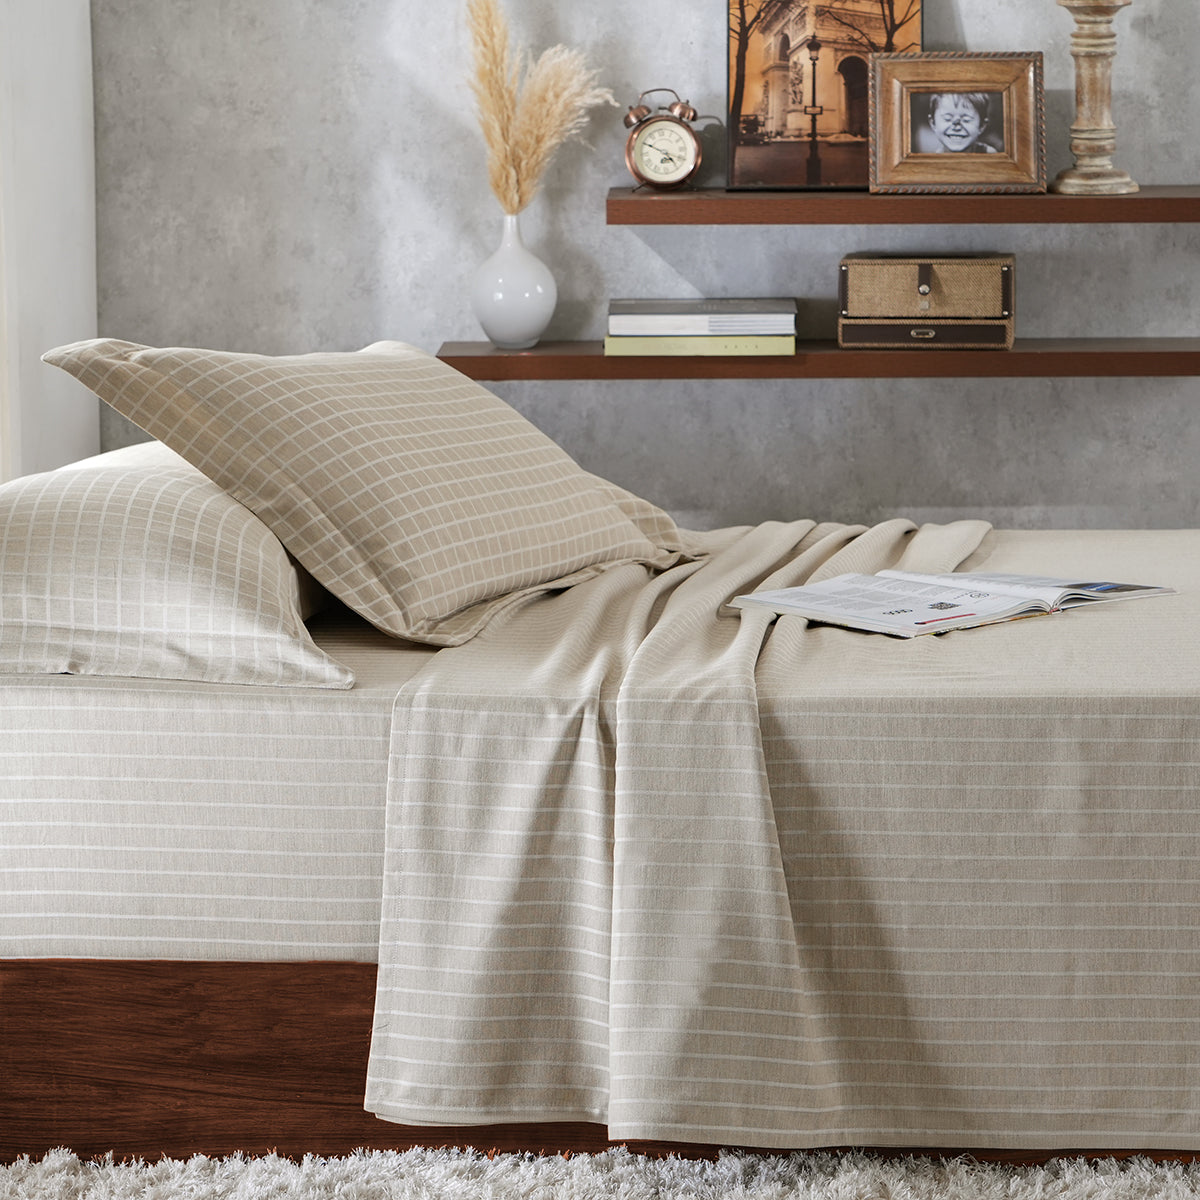 Bliss Reversible Made With Egyptian Cotton Ultra Soft Beige Bed Sheet